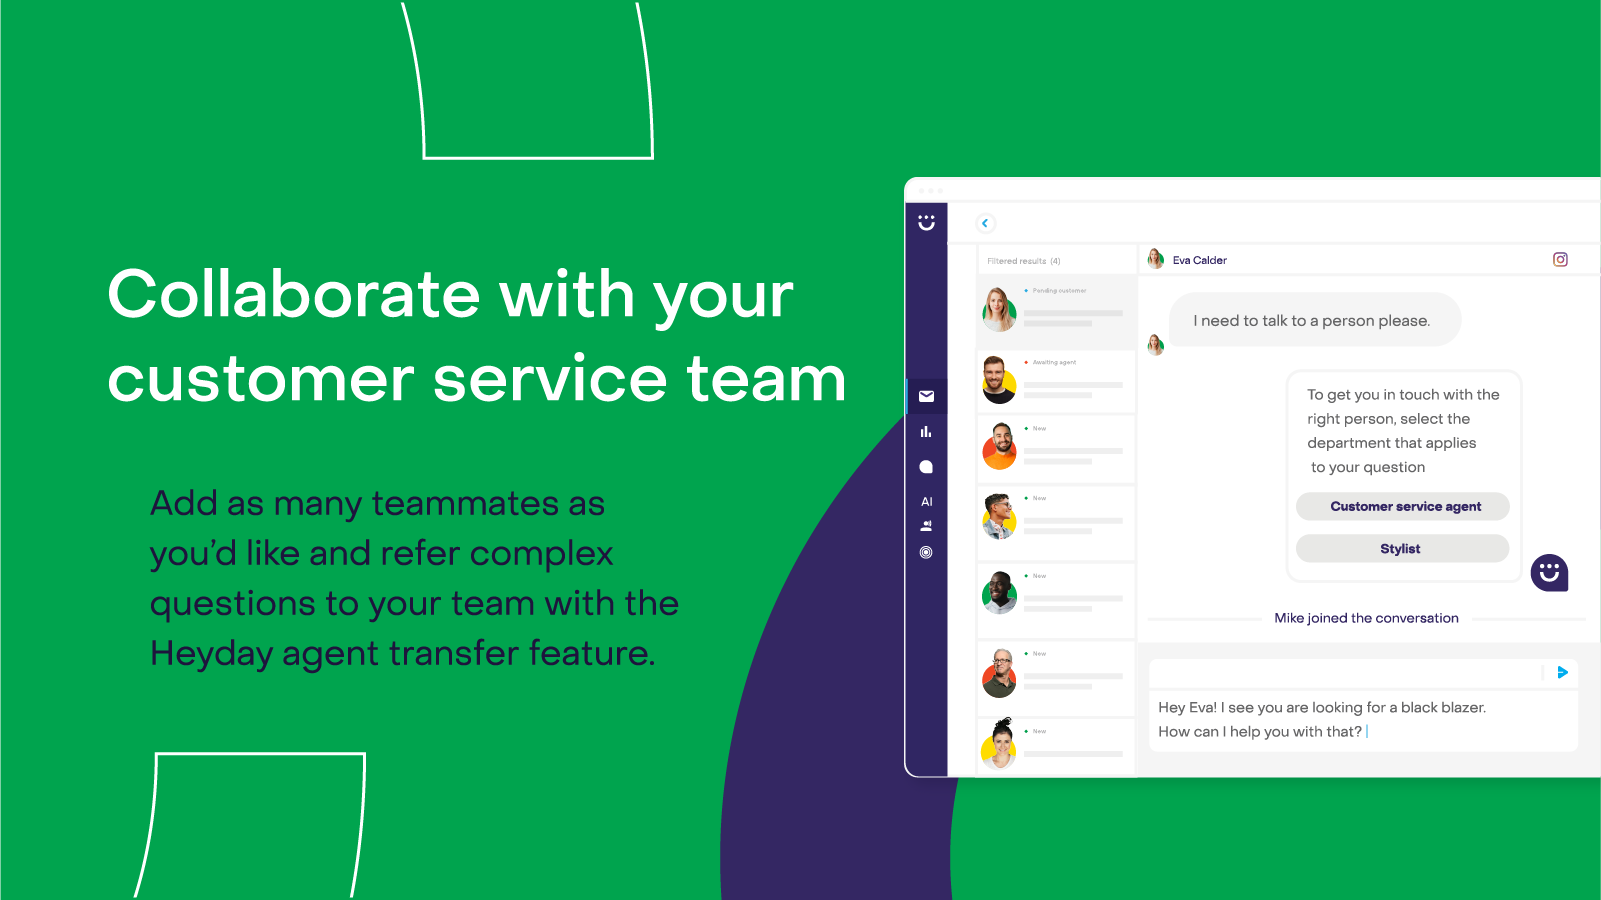 Add as many teammates as you’d like and refer complex questions to your team with the Heyday agent transfer feature.